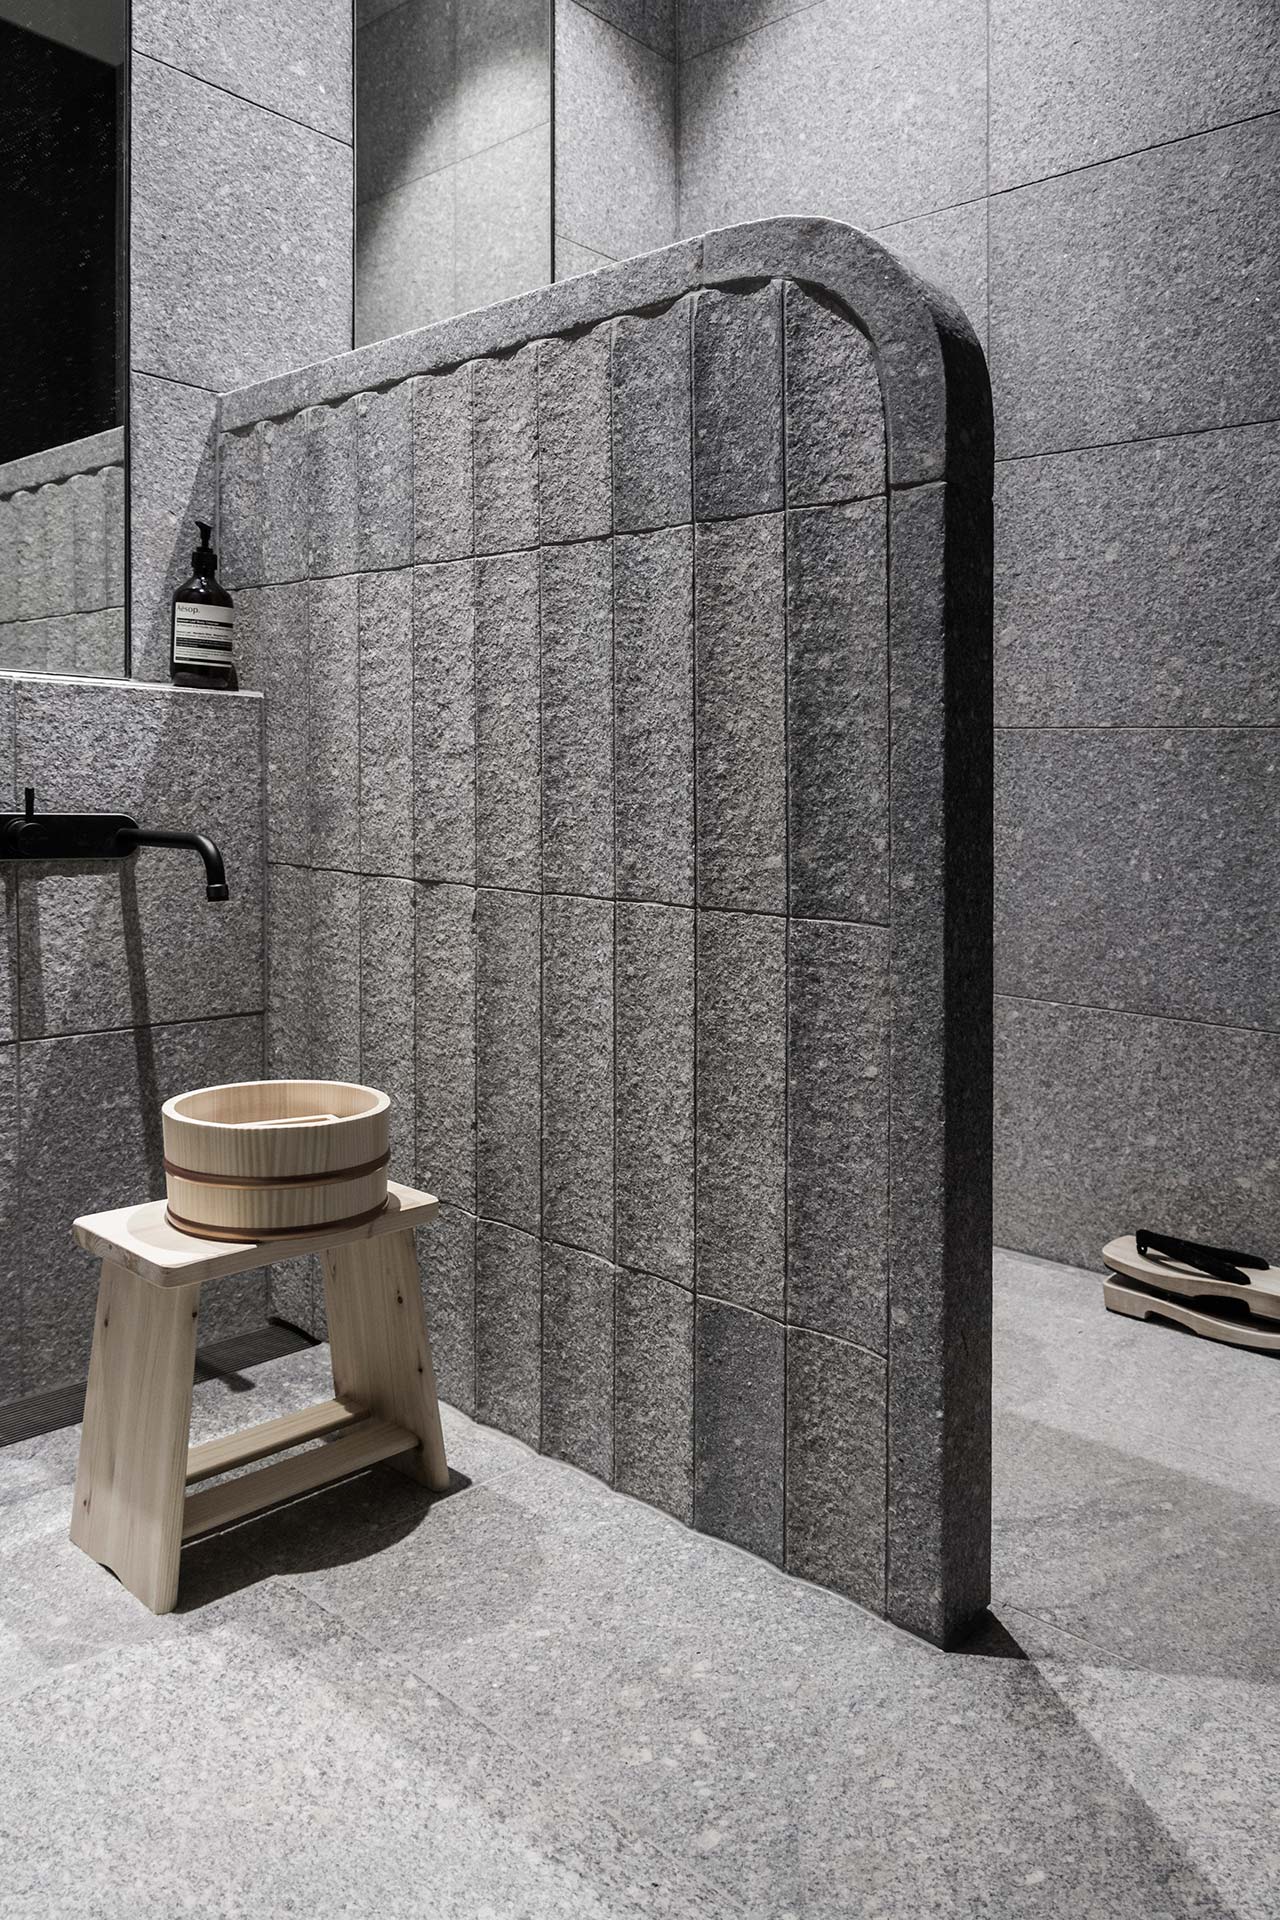 The bathroom is clad with stone tiles and reminds of Eastern spas